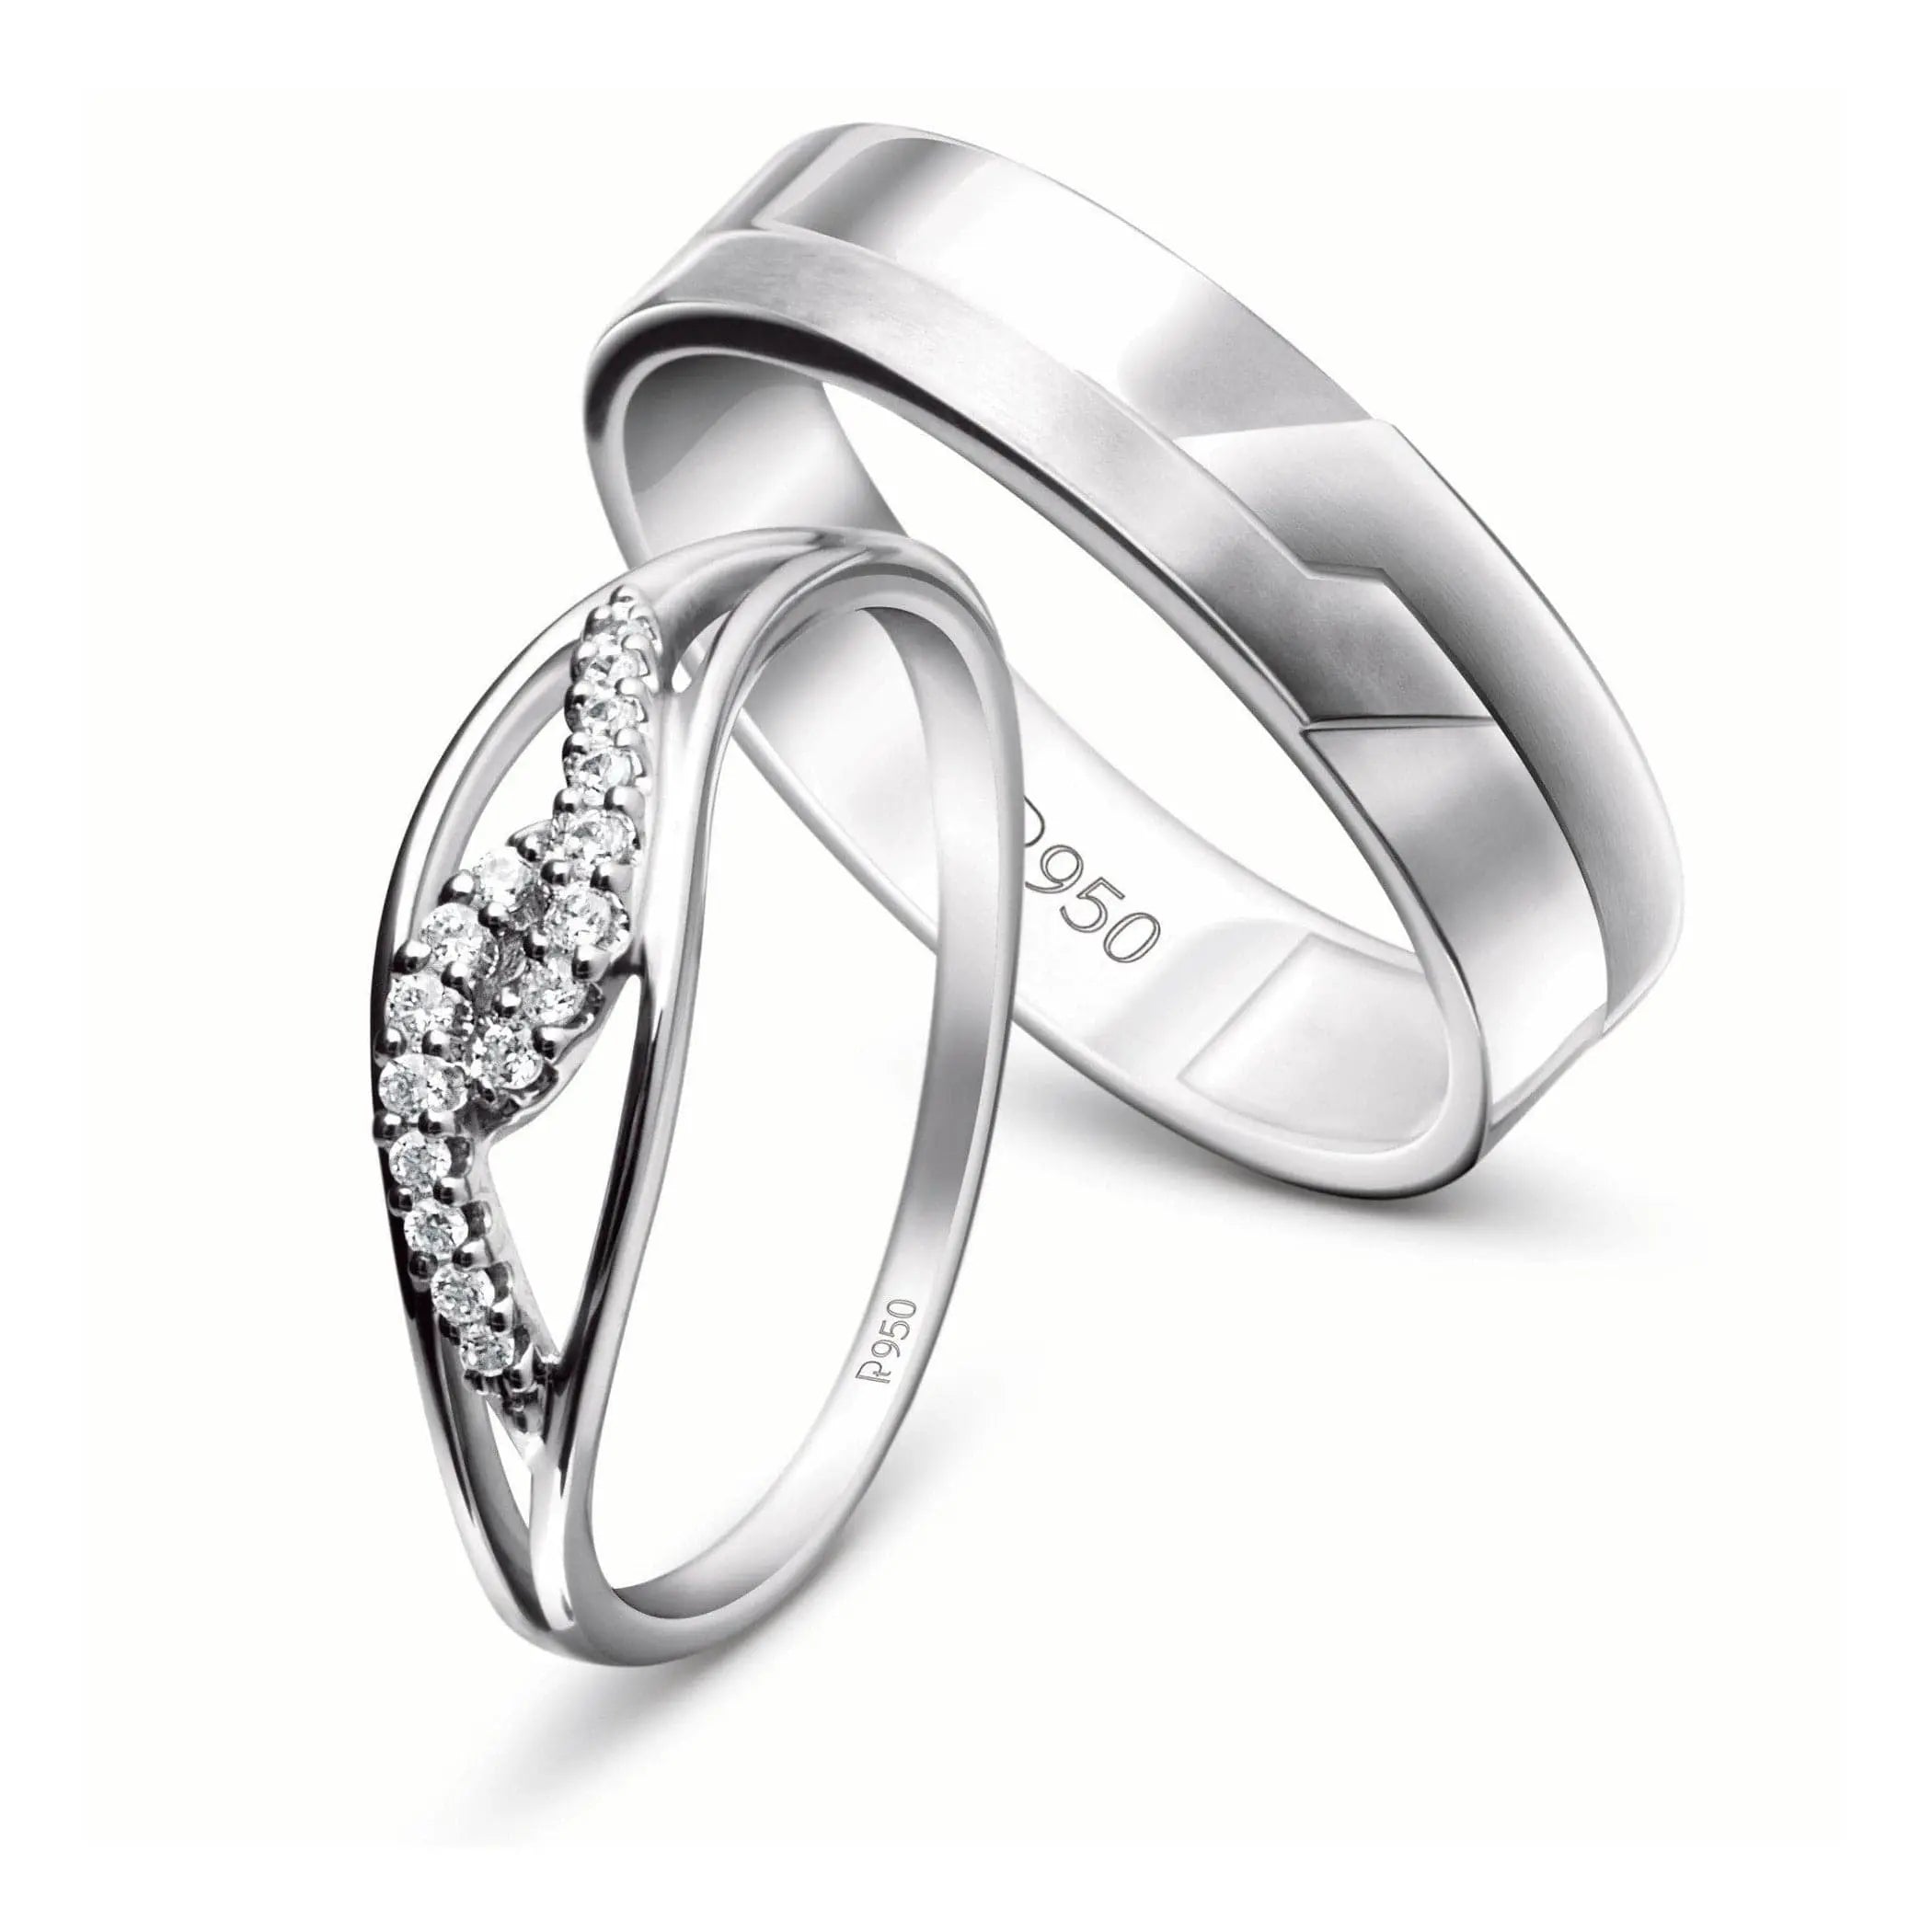 Resizing Rings | Get your rings resized on the North Shore